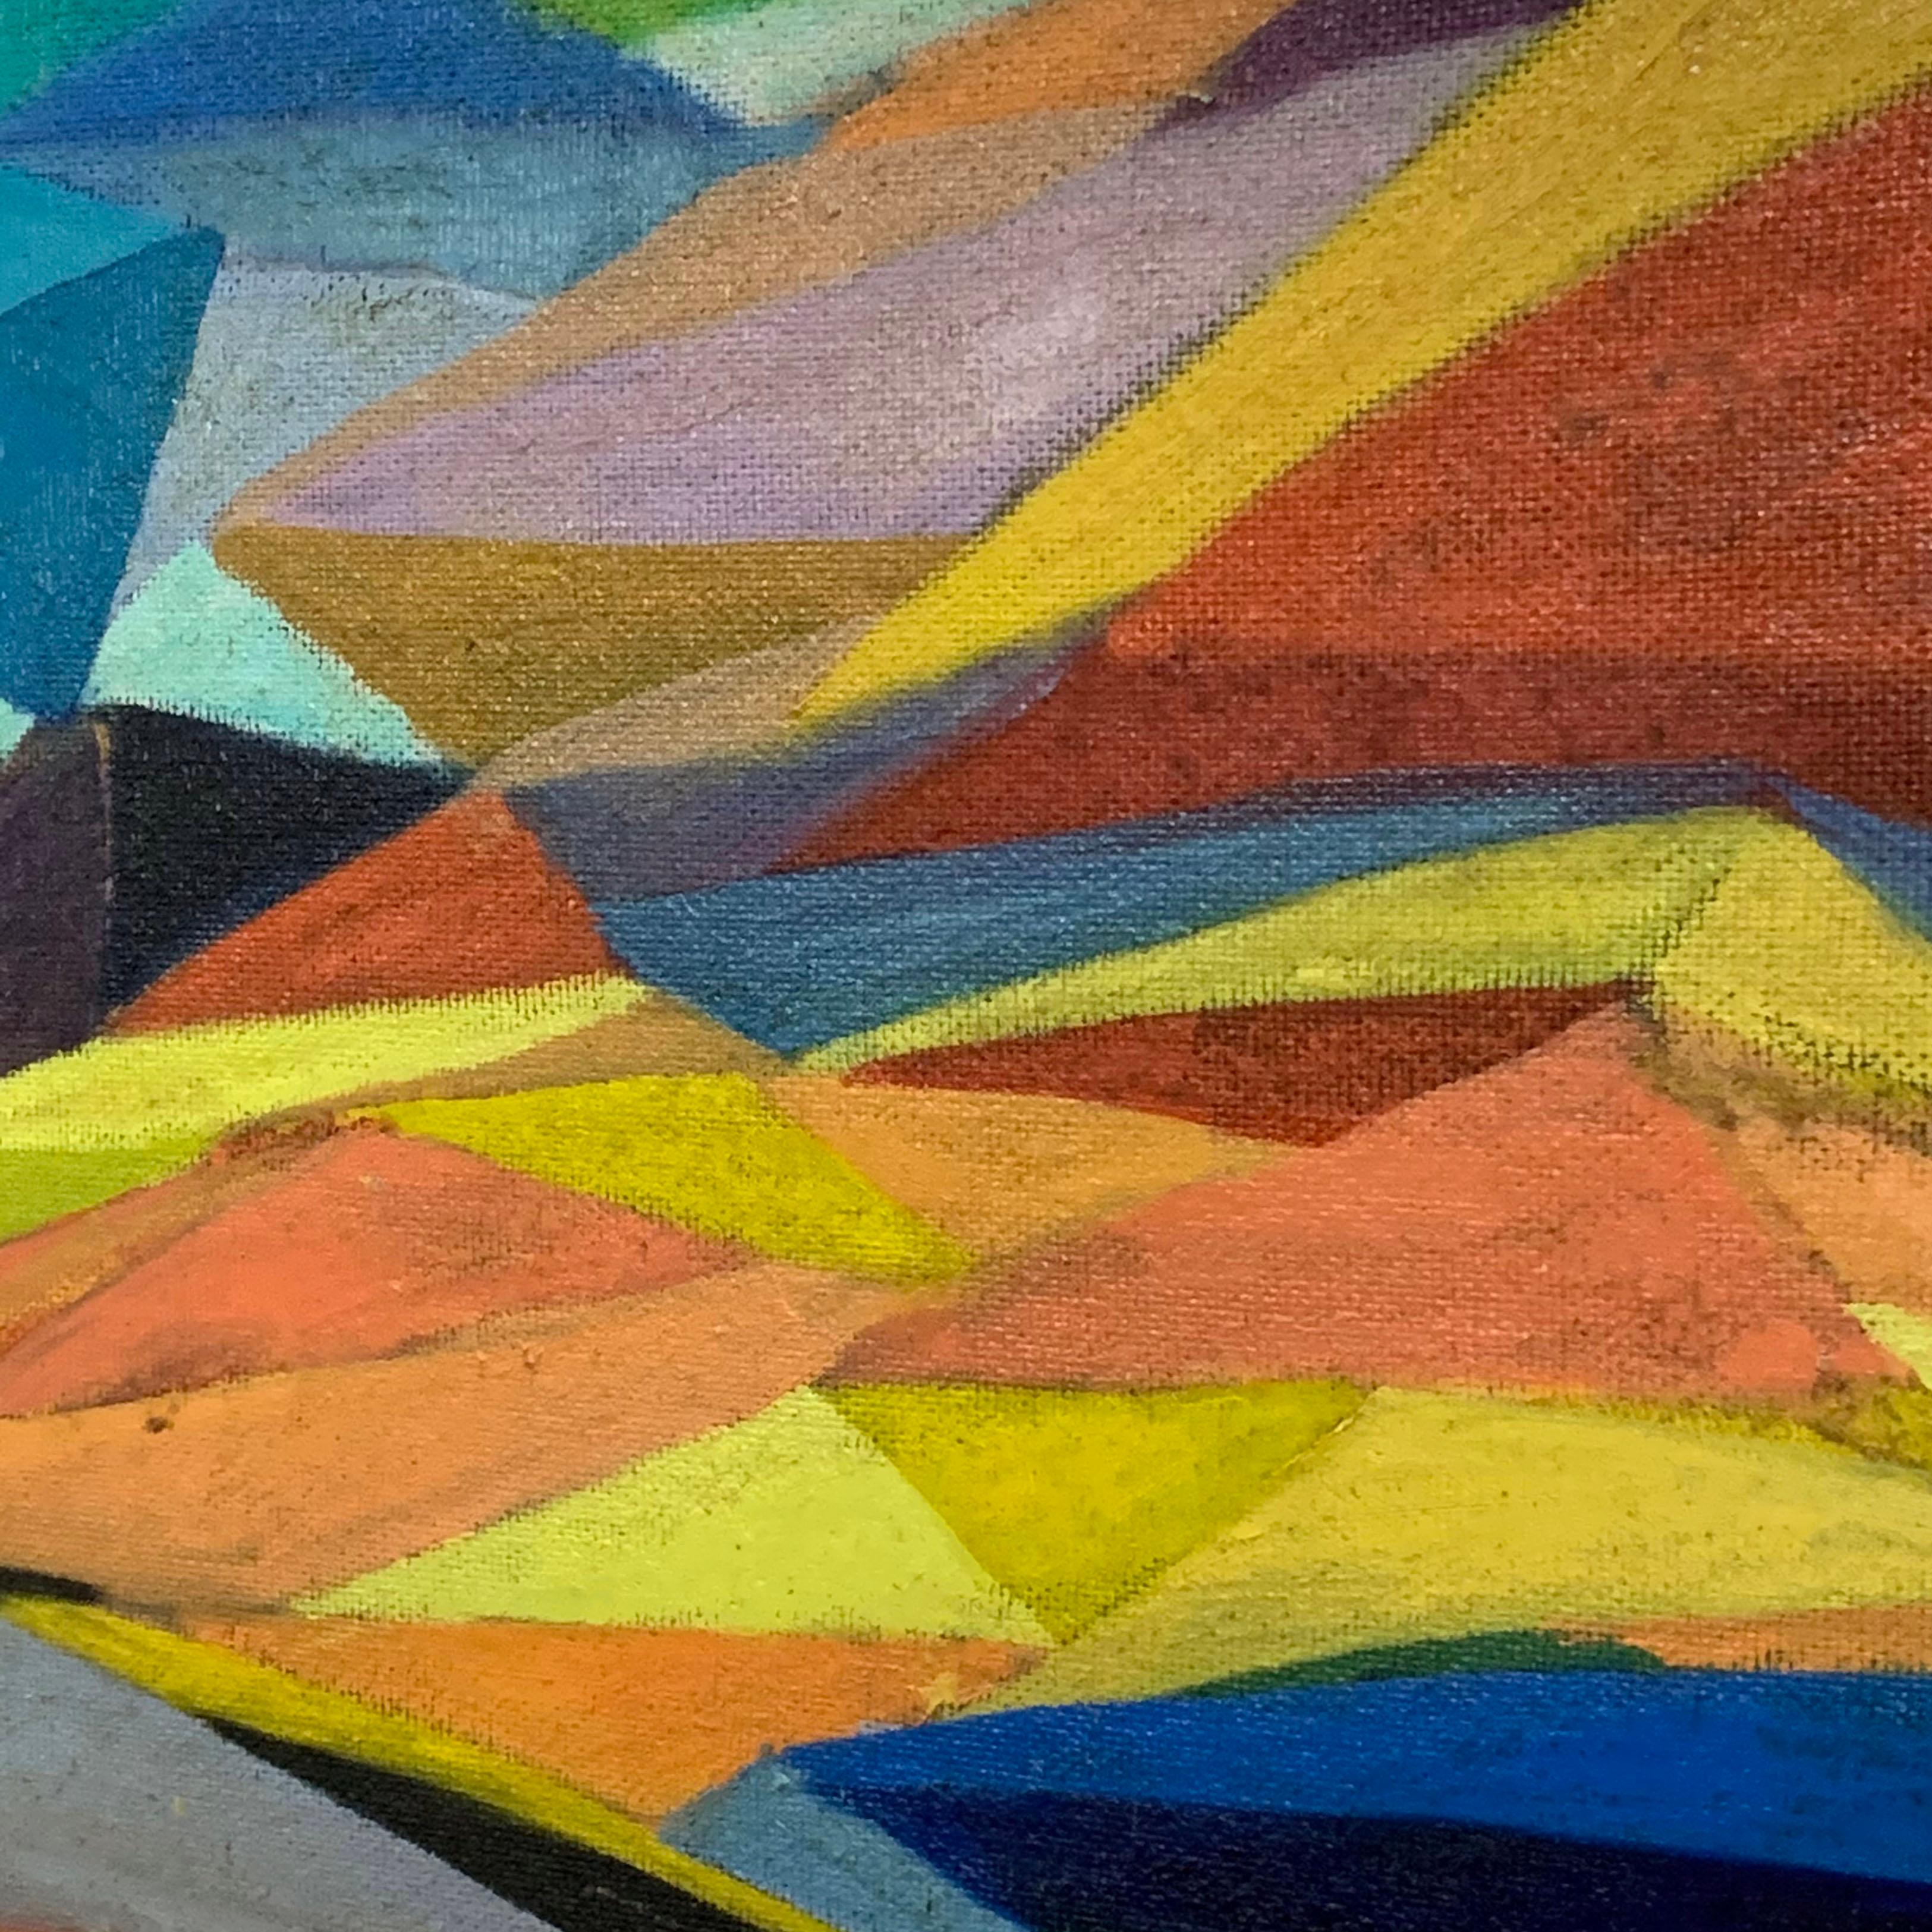 Mid-20th Century Abstract Landscape Painting of Laramie, Wyoming by Judy Langland, circa 1940s